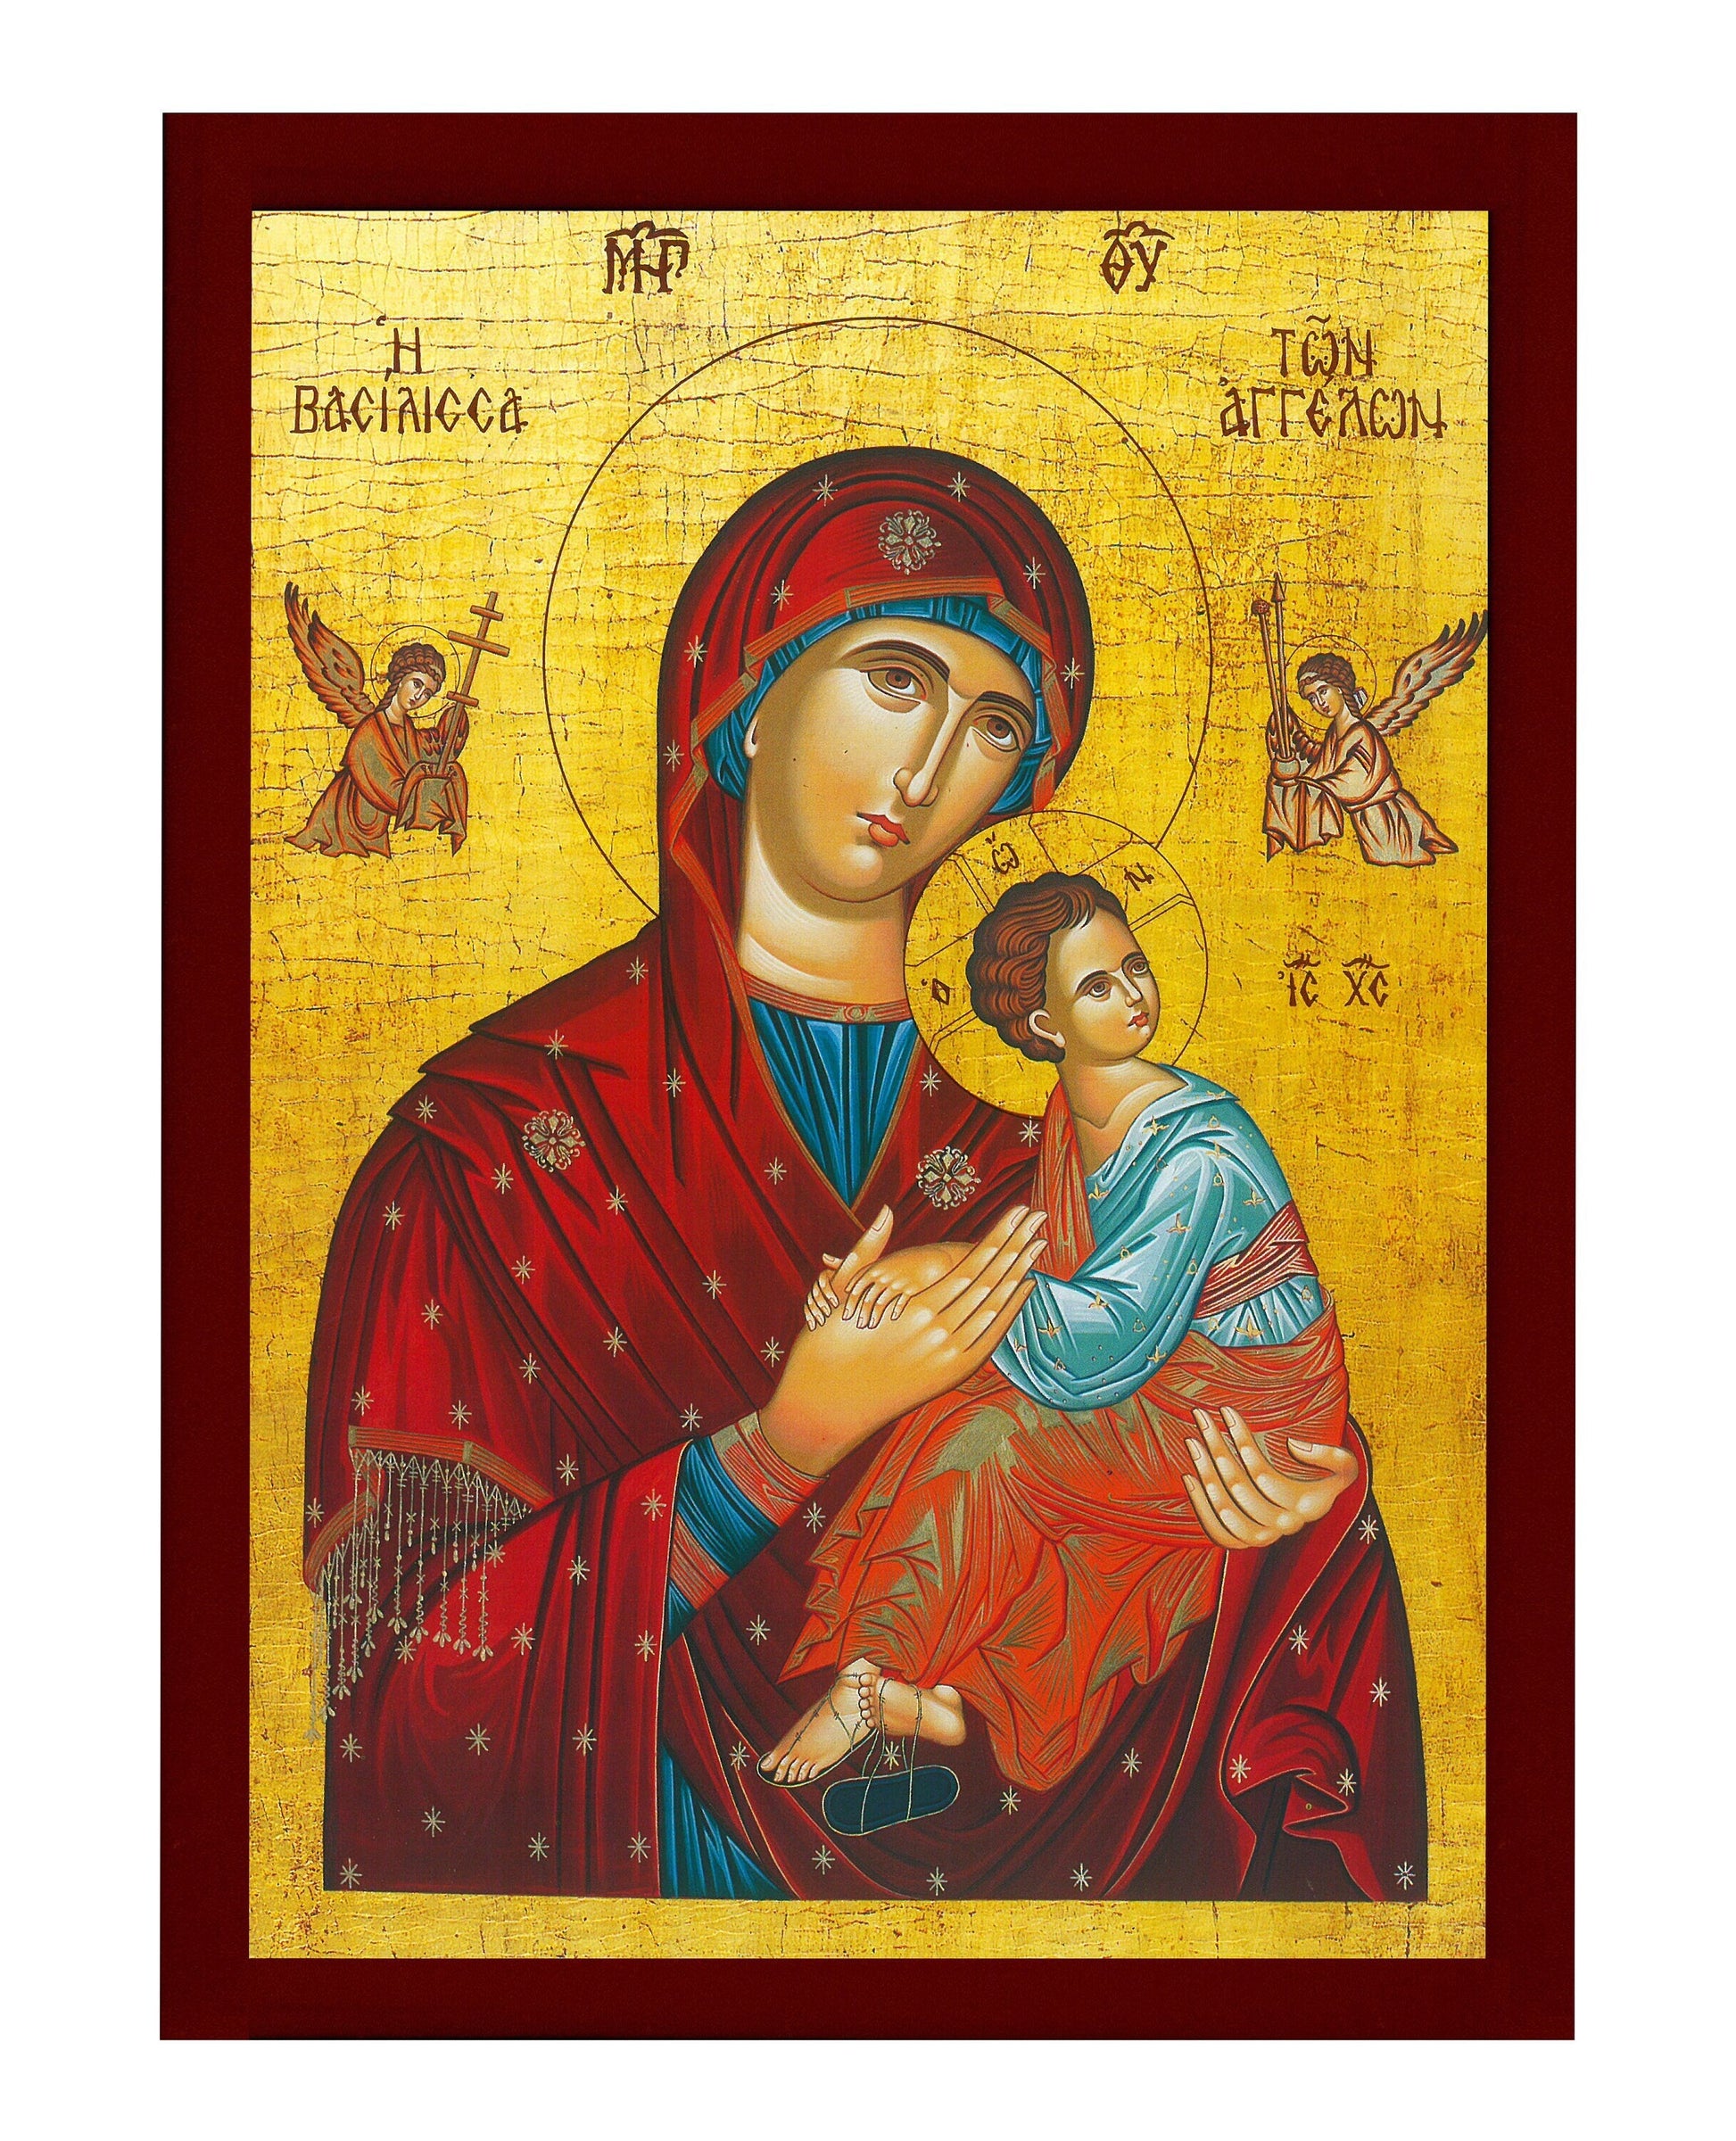 Virgin Mary icon Panagia, Handmade Greek Orthodox Icon Queen of Angels, Mother of God Byzantine art, Theotokos wall hanging wood plaque TheHolyArt